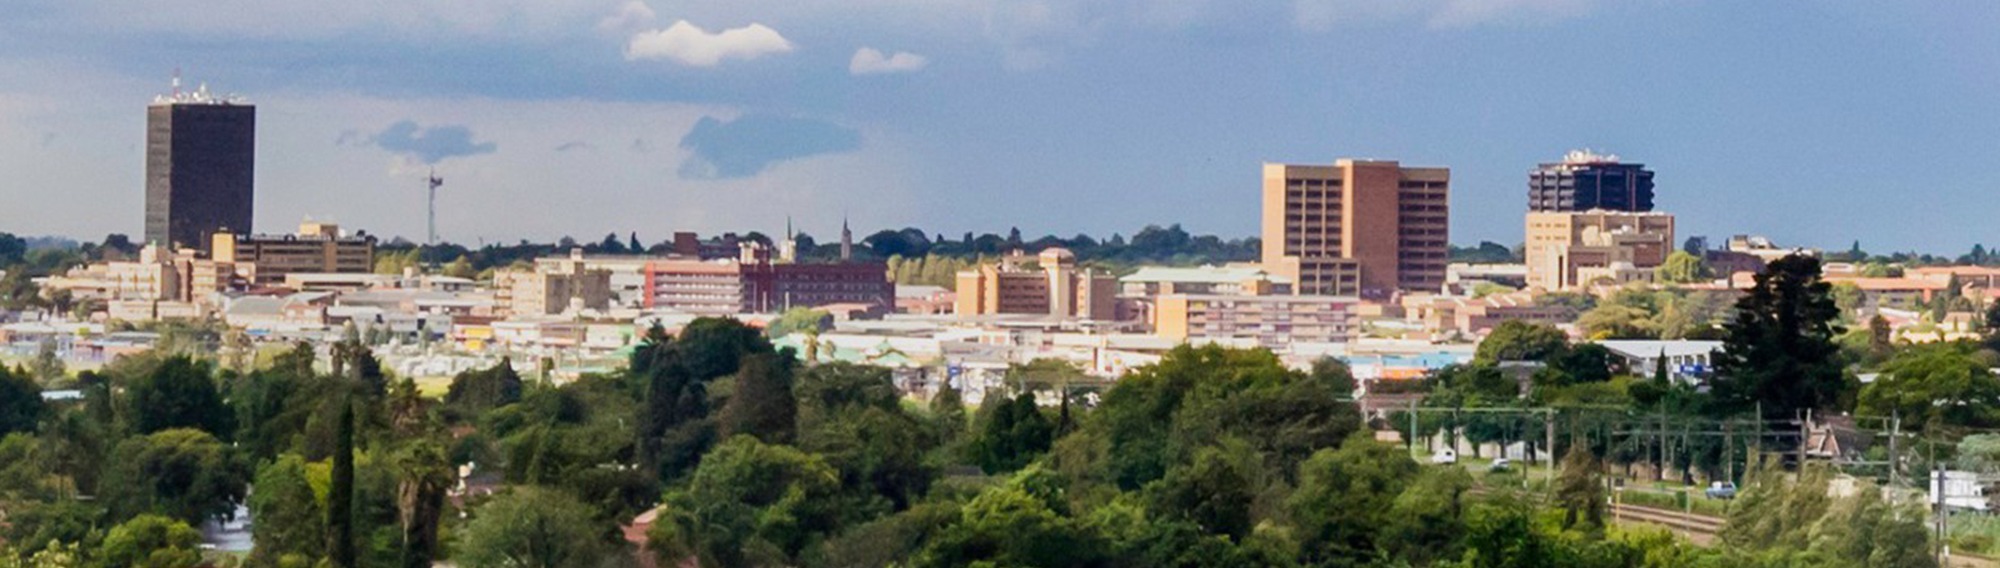 Panoramic view of Kempton Park with urban buildings surrounded by lush greenery under a cloudy sky.